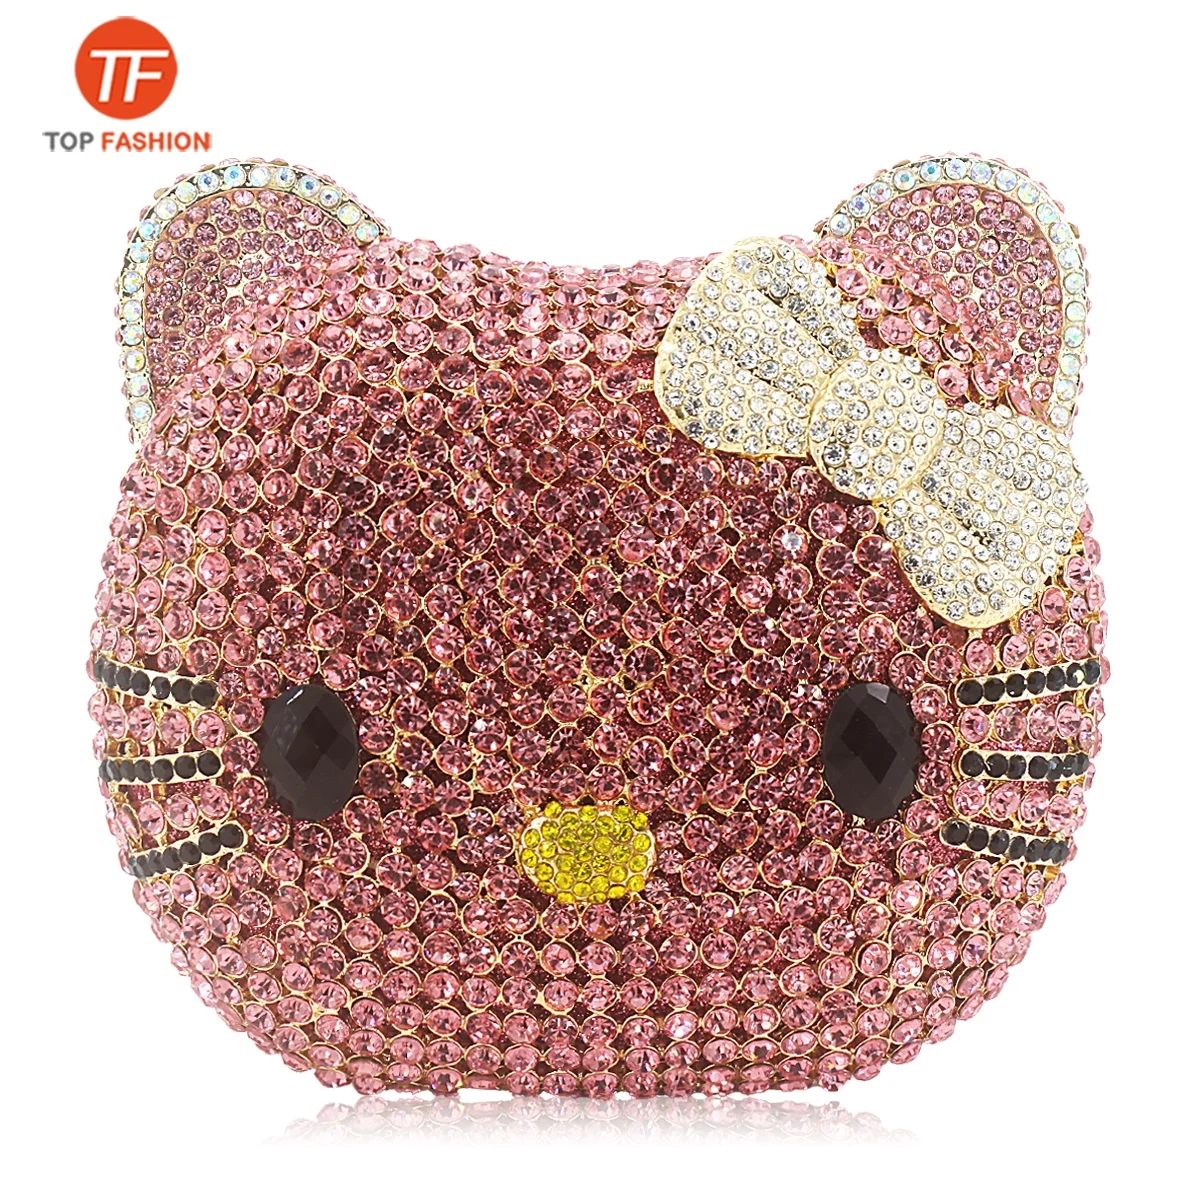 

China Factory Wholesales Luxury Crystal Rhinestone Clutch Evening Bag Wedding Party Hello Kitty Cat Minaudiere Purse, ( accept customized )